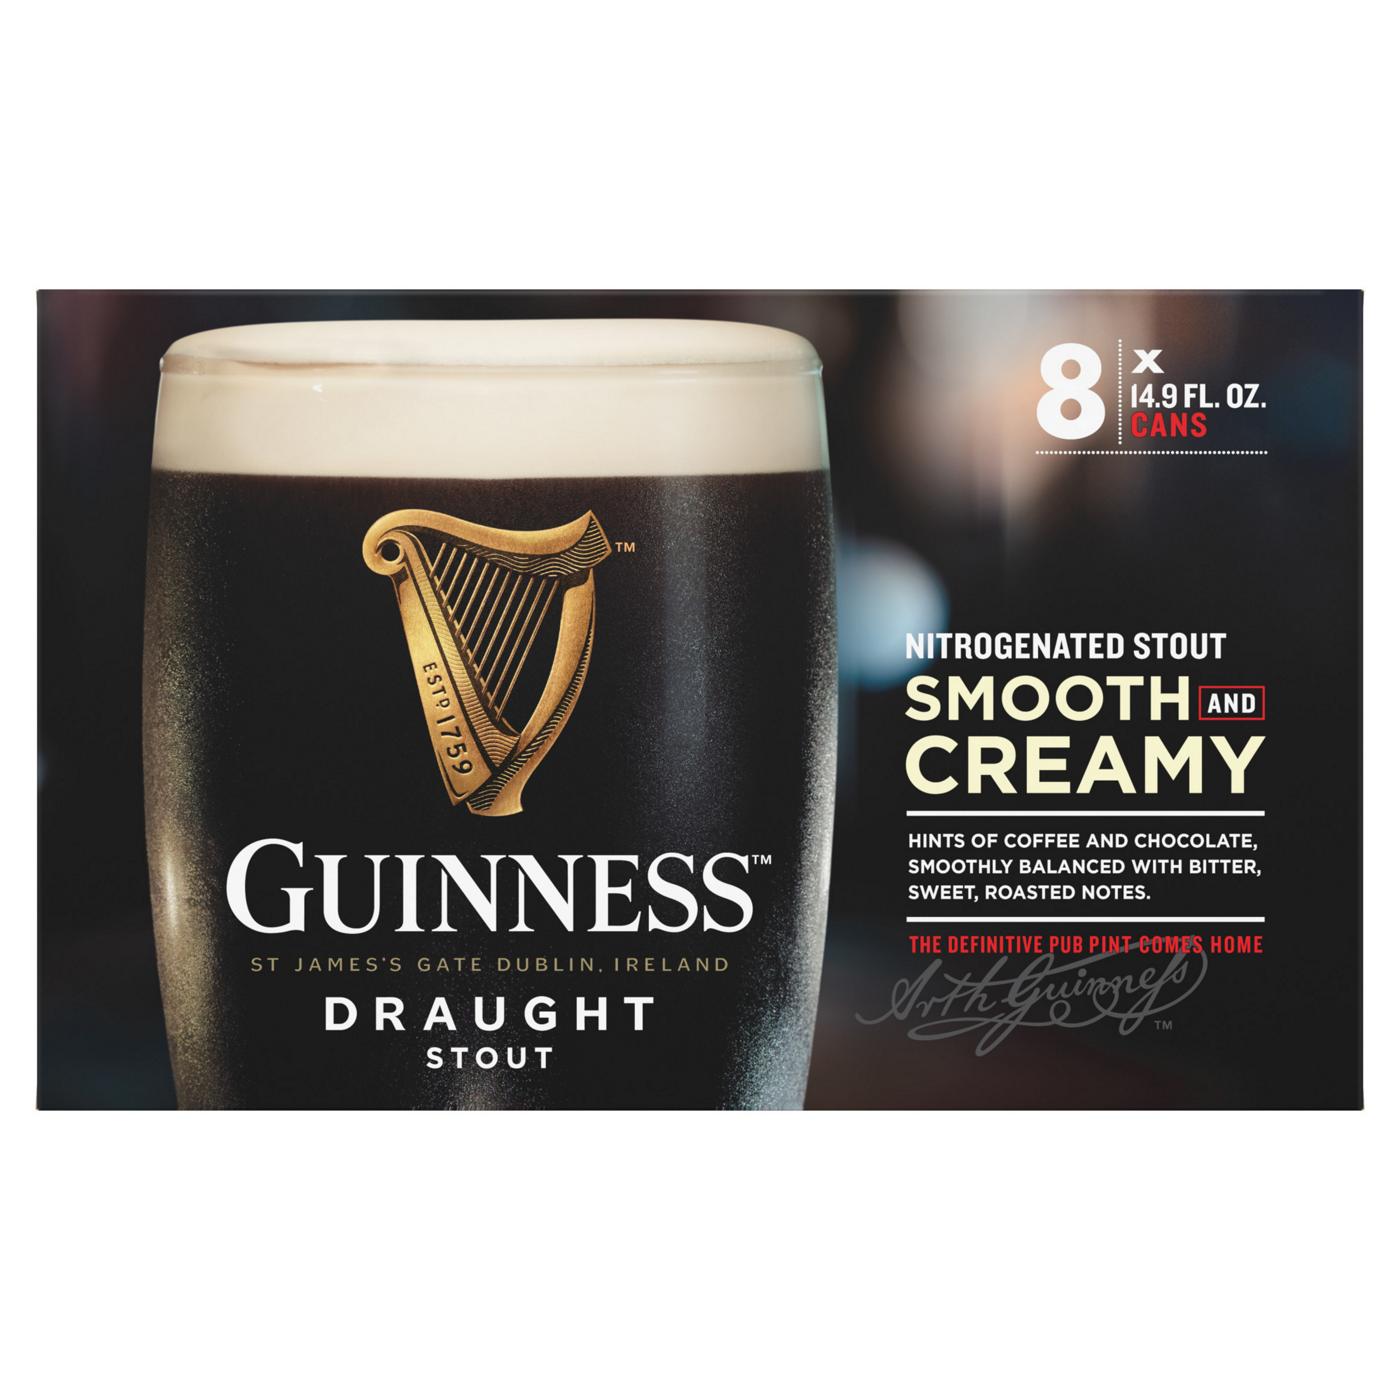 Guinness Draught Stout Beer; image 2 of 6